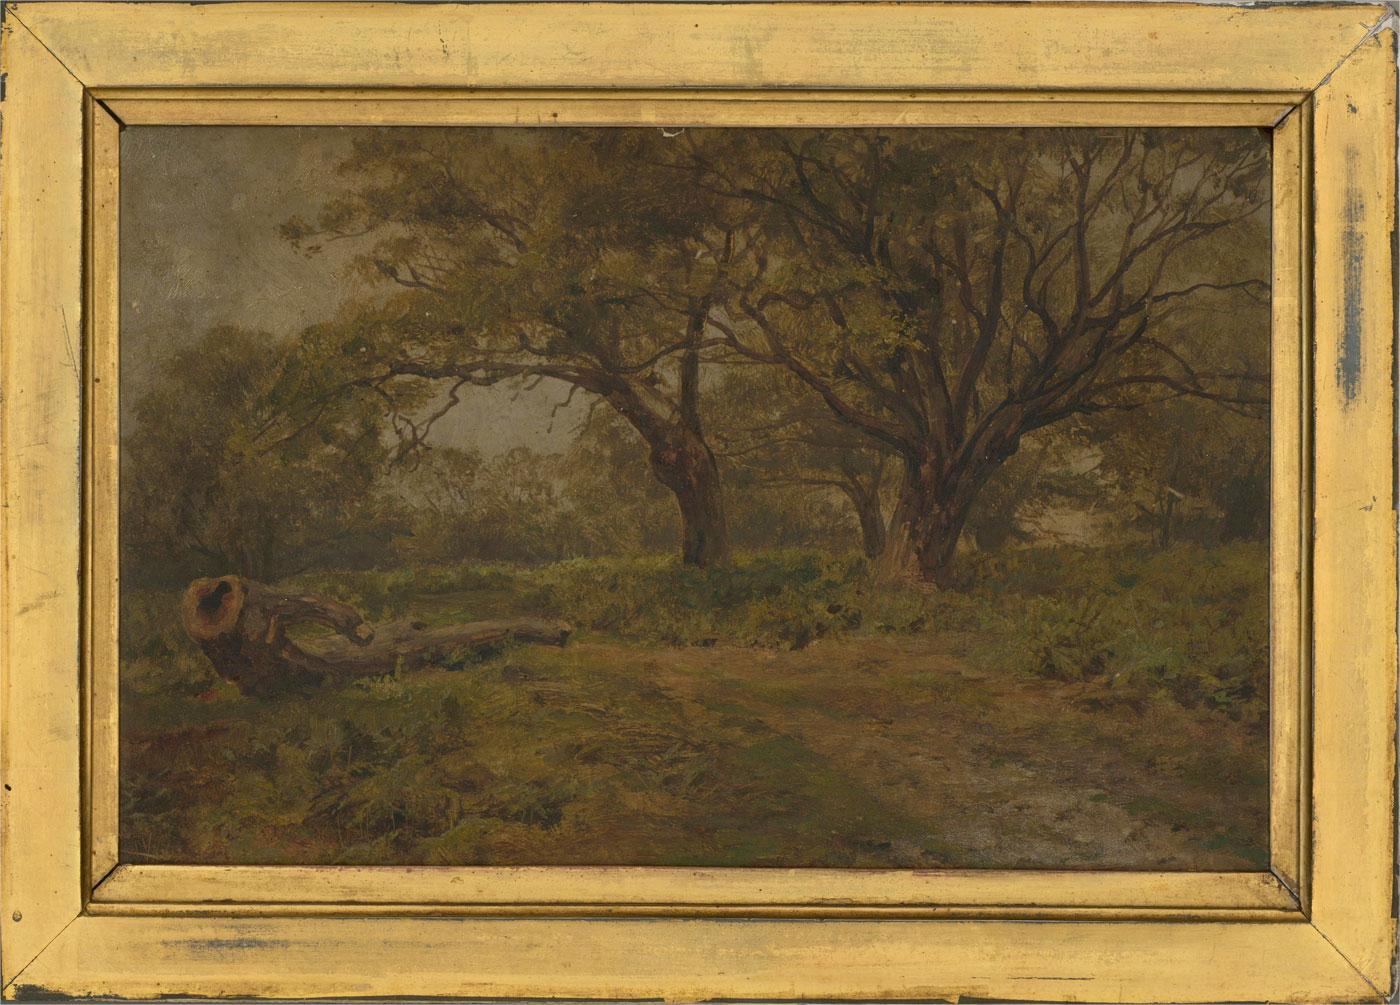 Unknown Landscape Painting - Late 19th Century Oil - Woodland Landscape